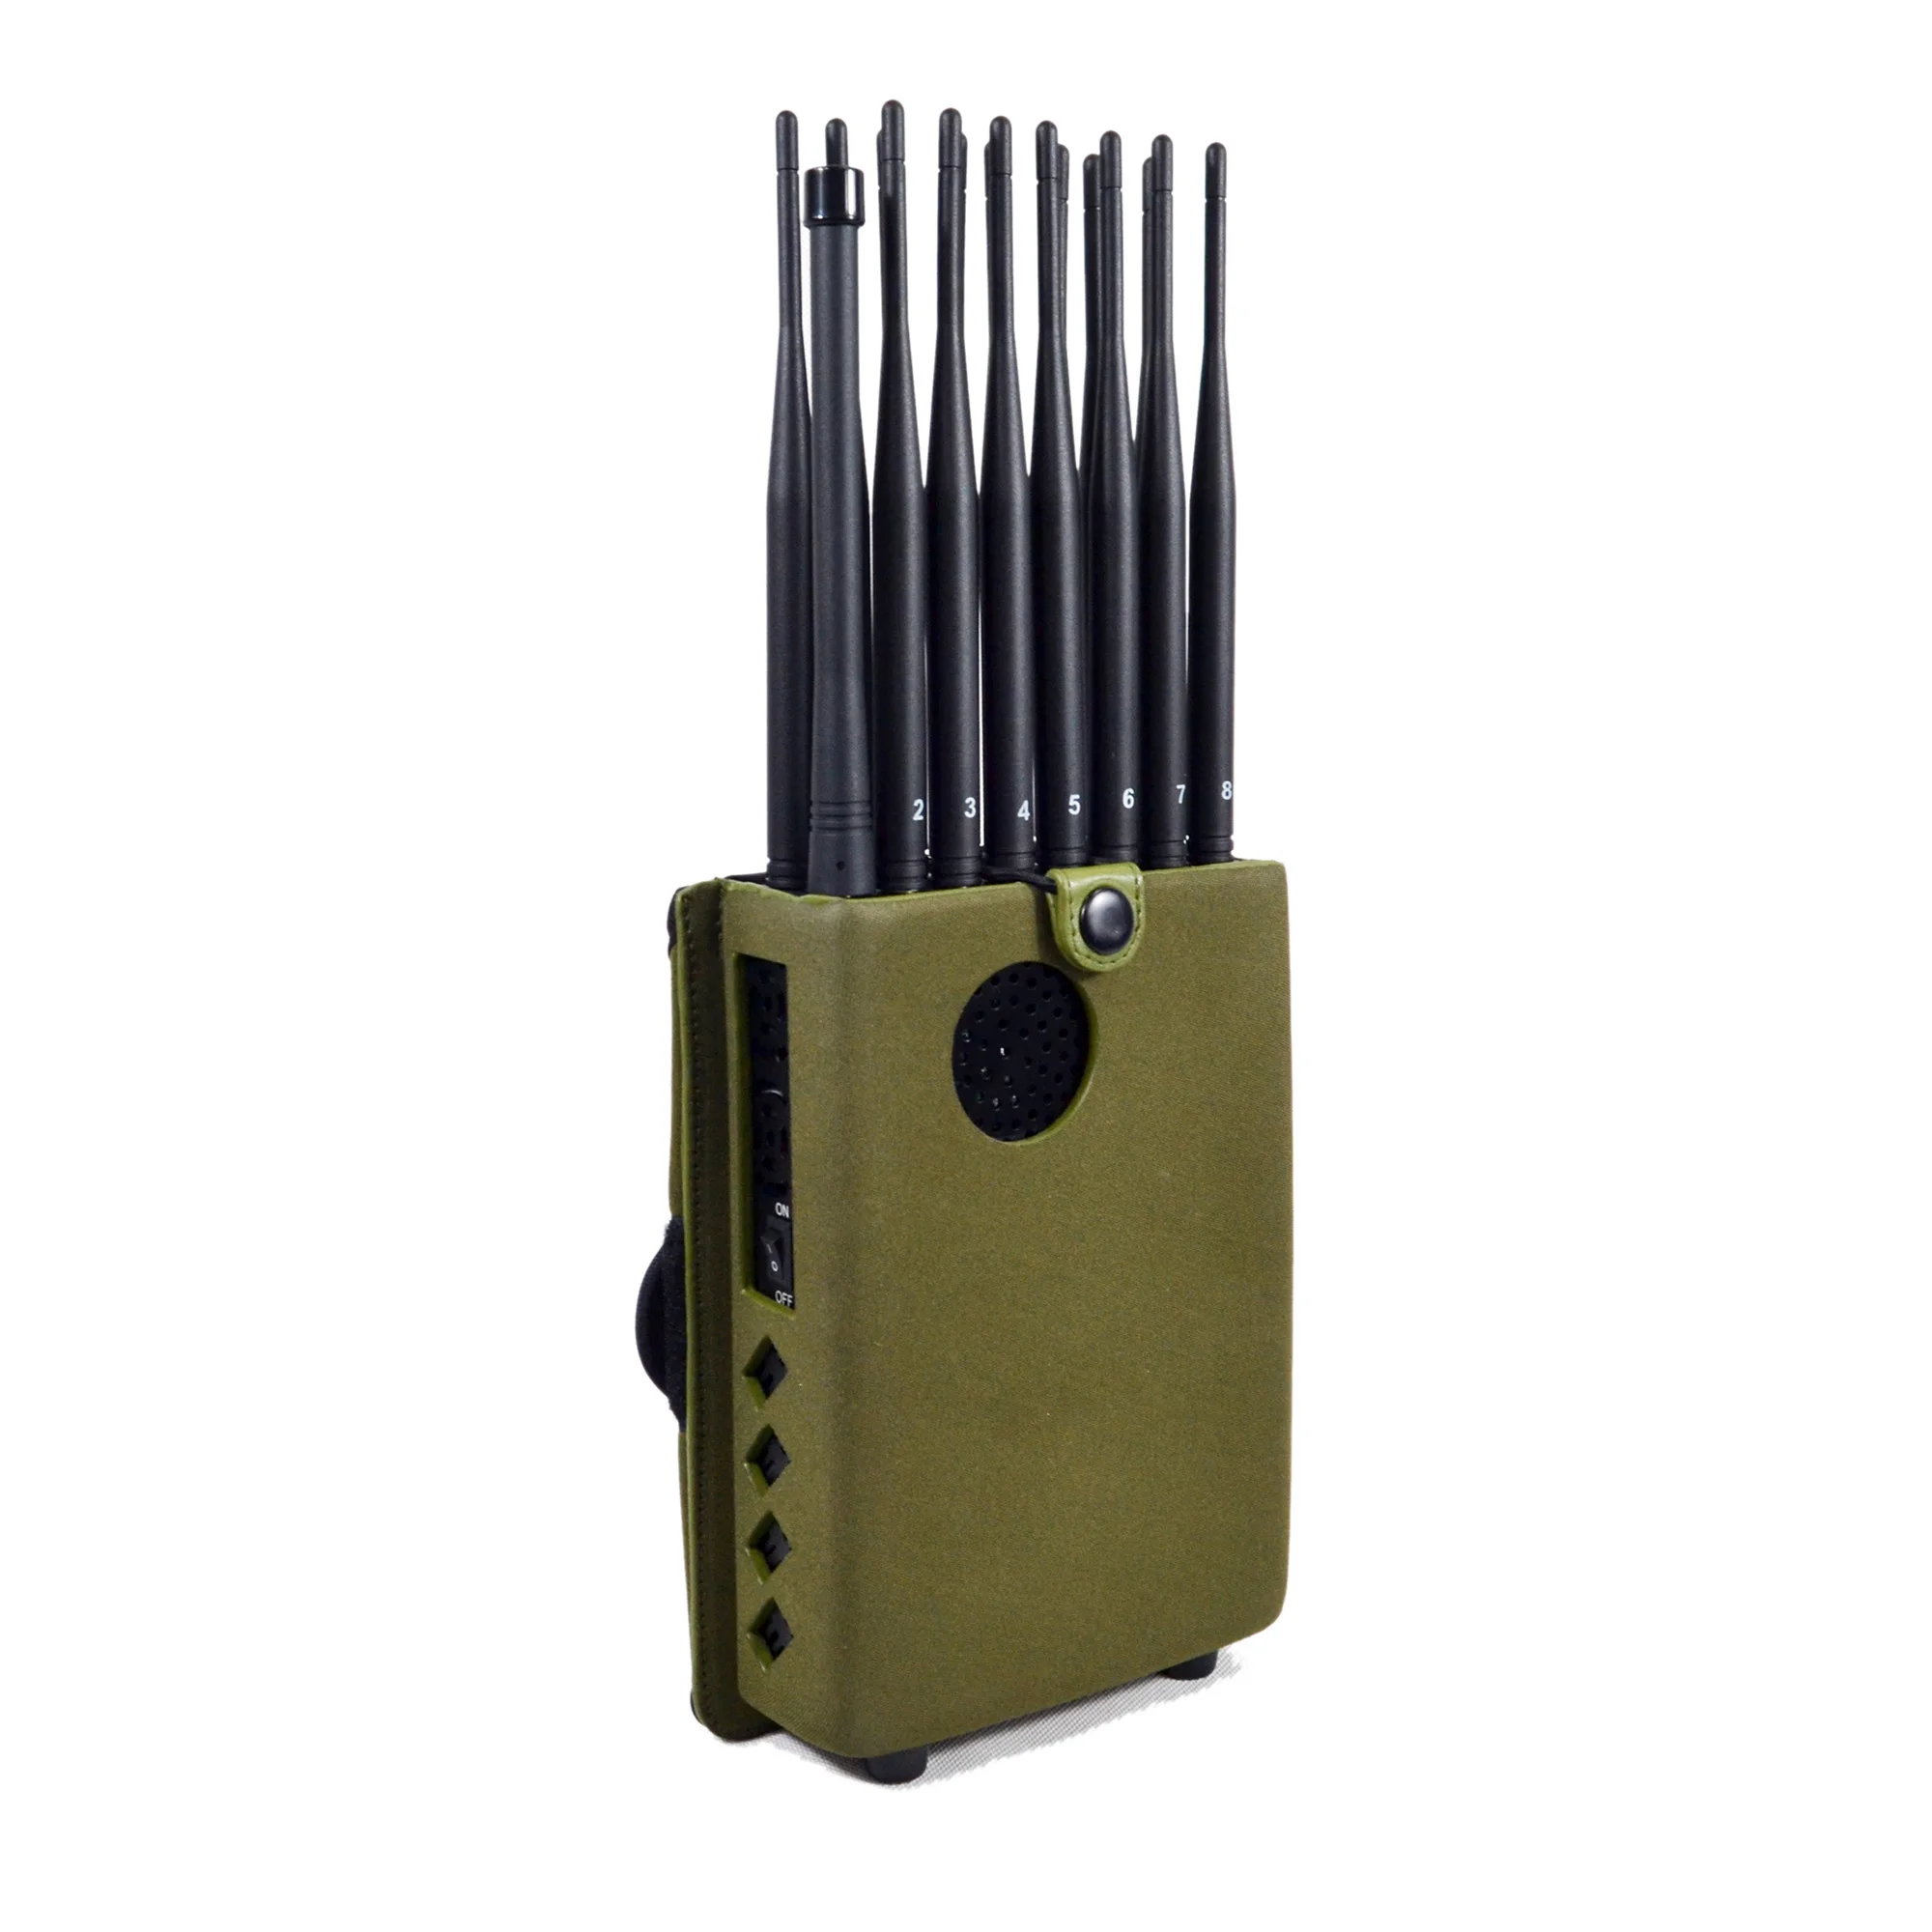 The Latest Handheld 16 Bands Cell Phone Jammer With Nylon Cover,Blocking 5G 4G Wi-Fi5G Jammer